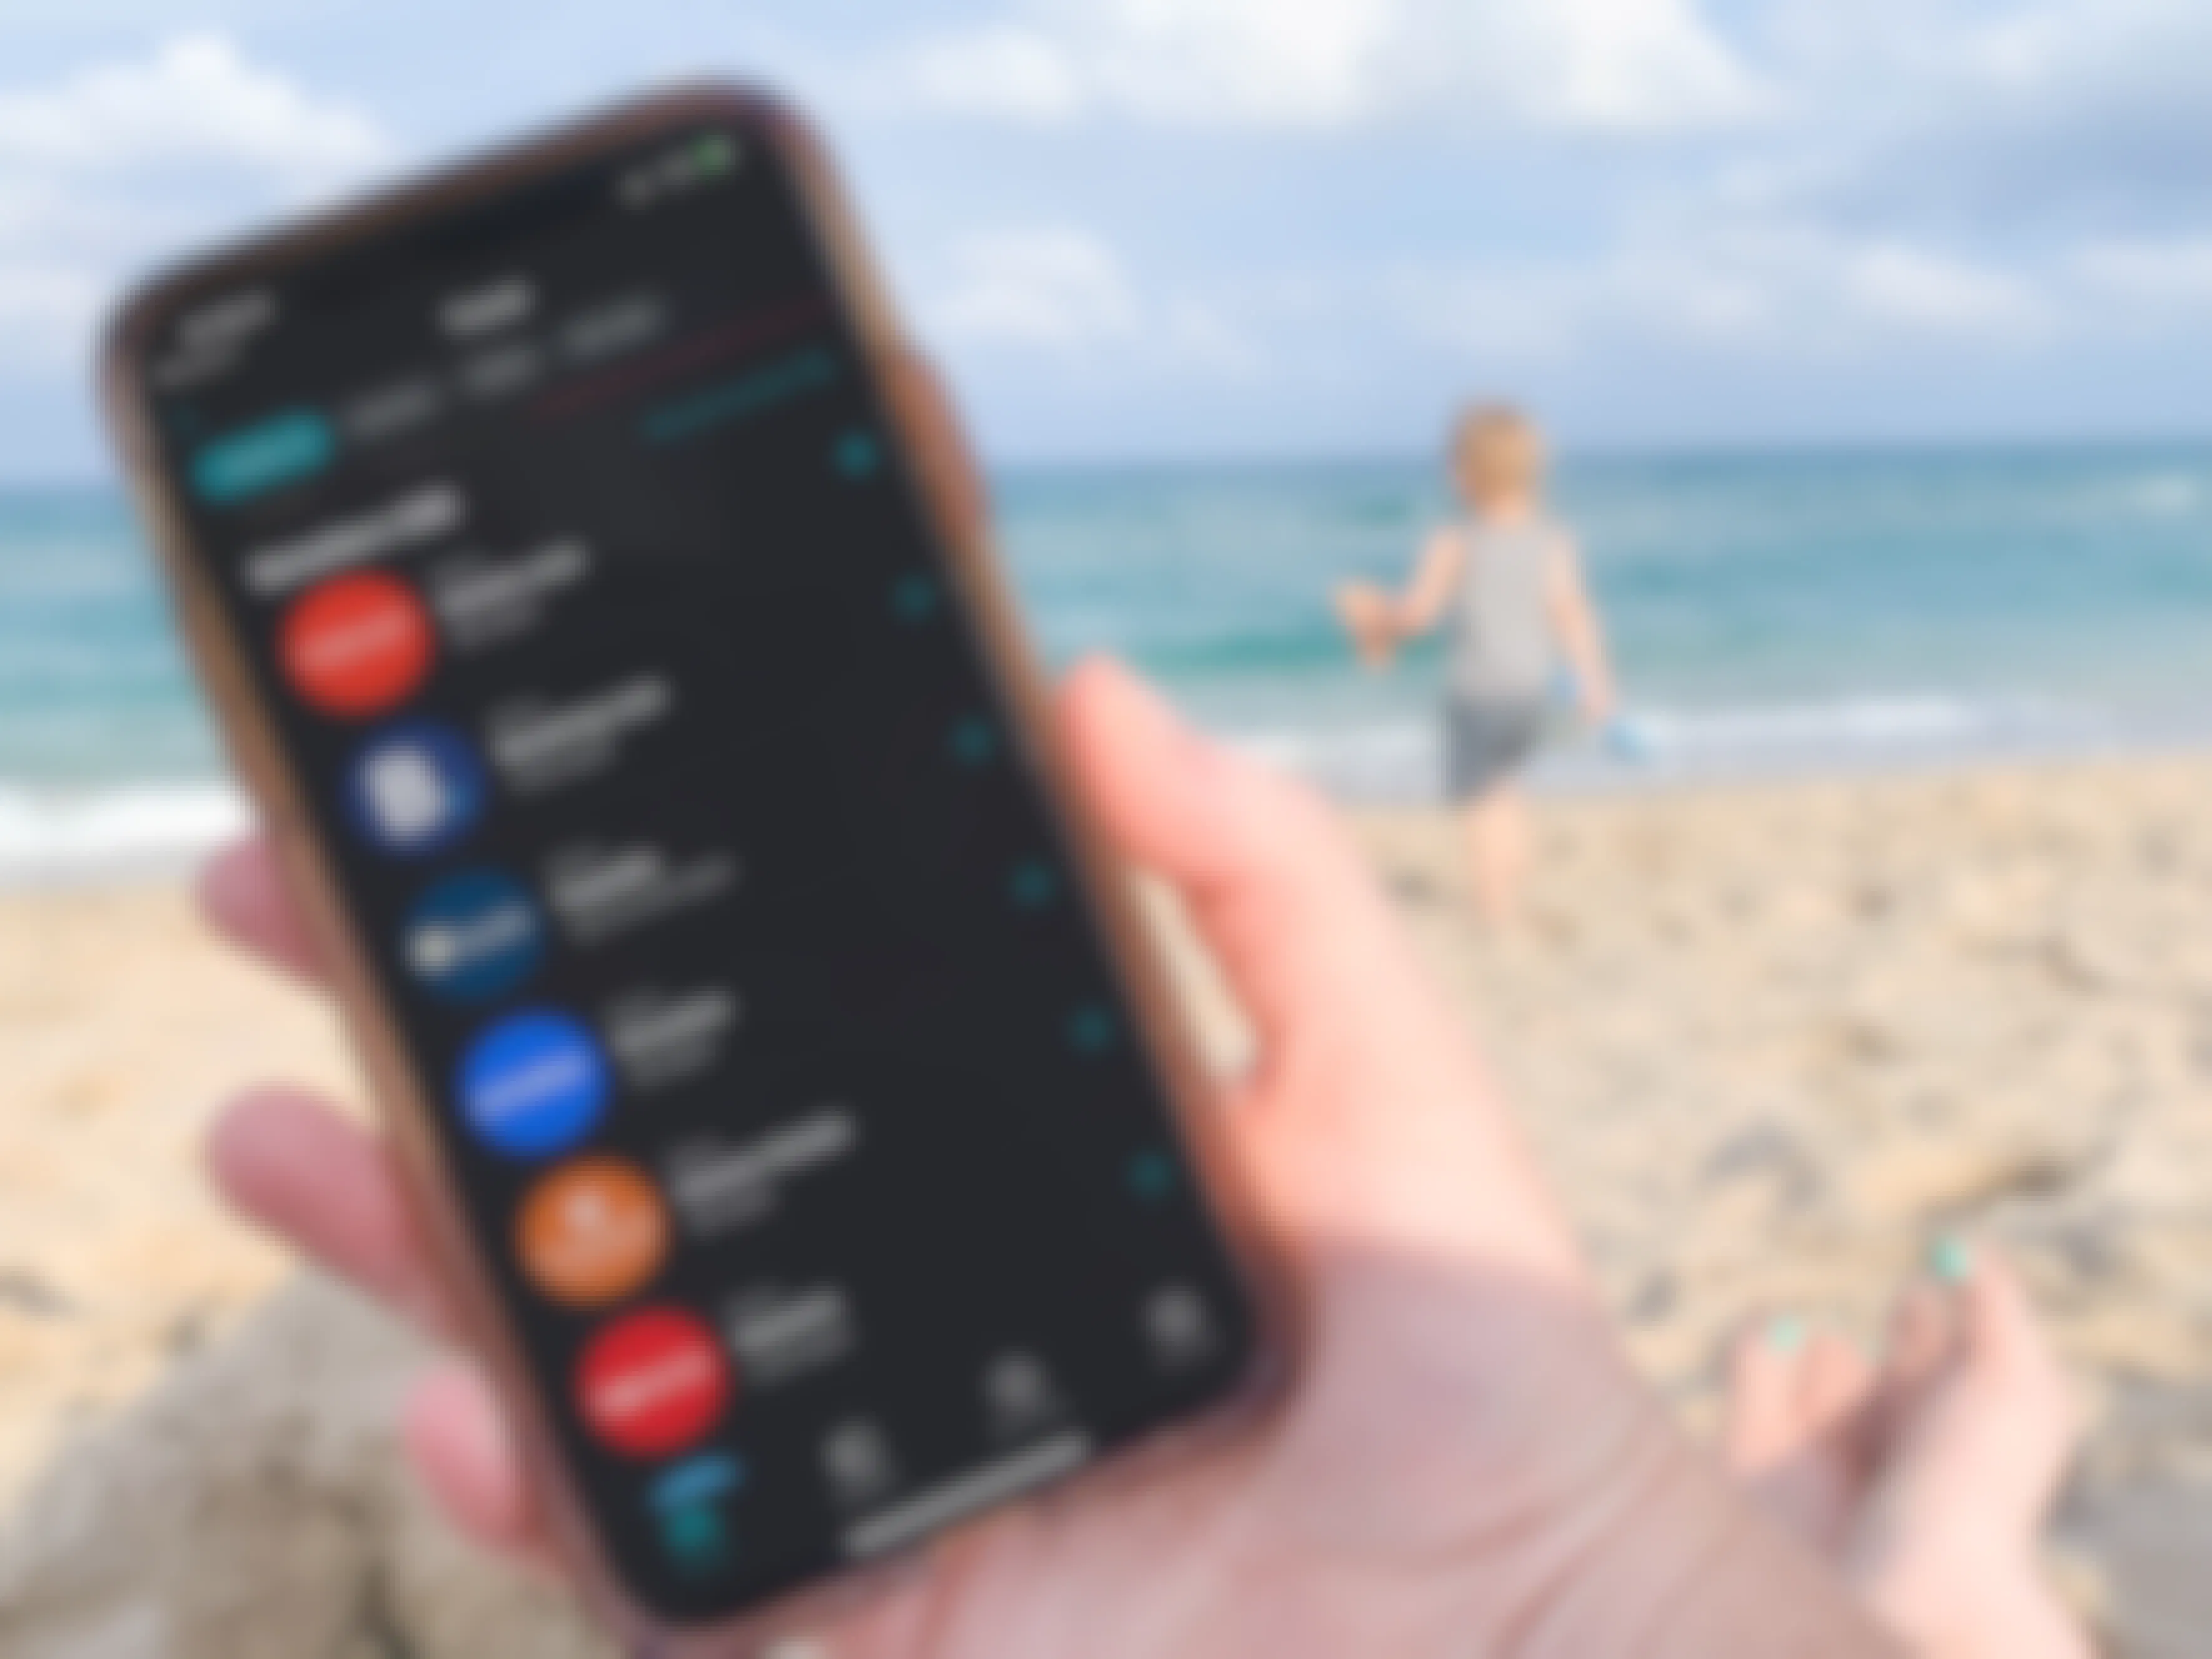 cellphone being held at the beach with the ibotta app